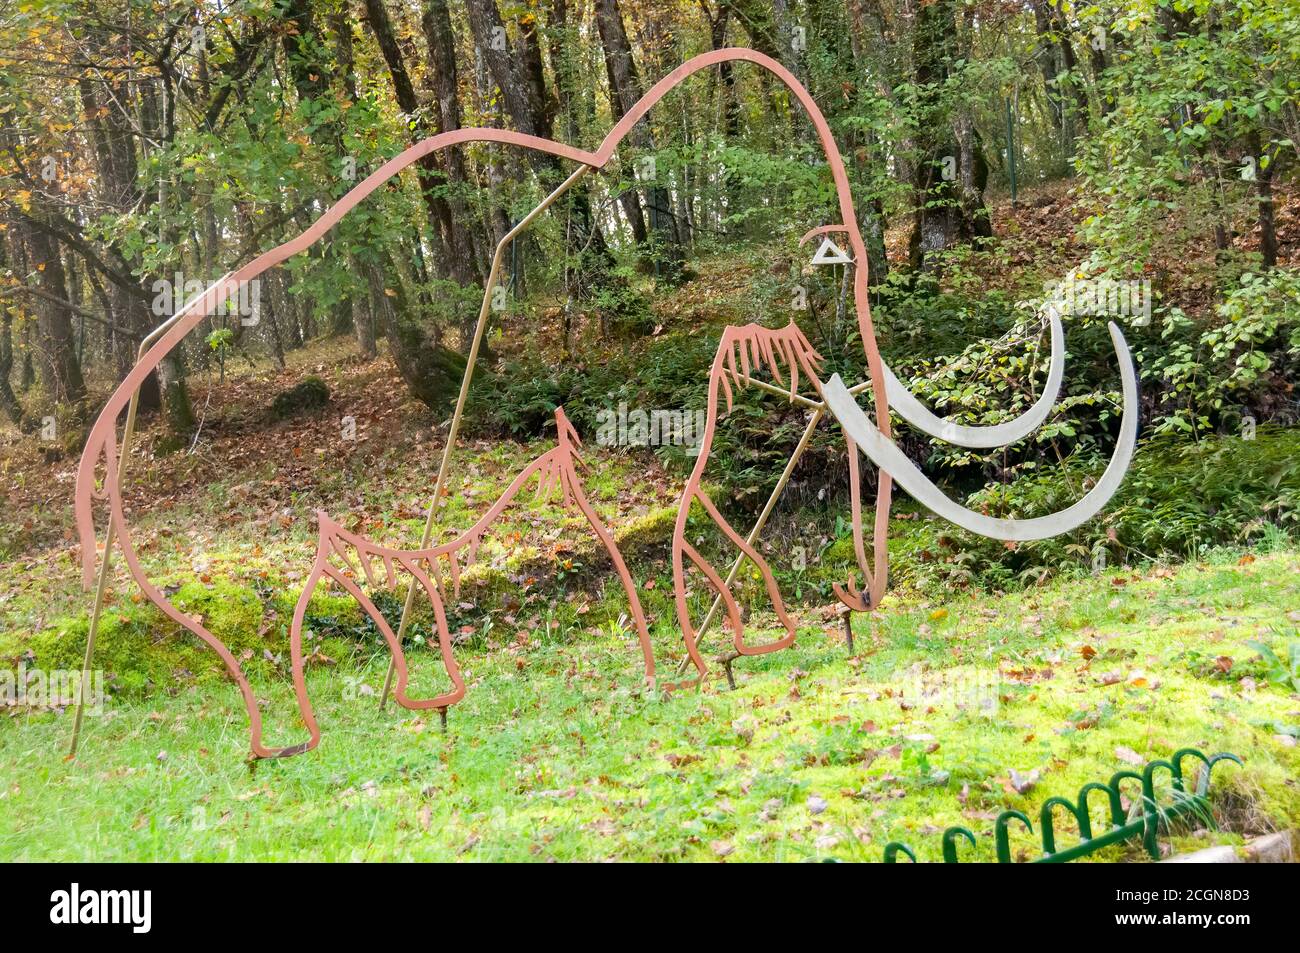 Rouffignac, France - October 27, 2013: Prehistoric mammoth matal sculpture near the entrance to the caves of Roufifignac (In French: Grotte de Rouffig Stock Photo